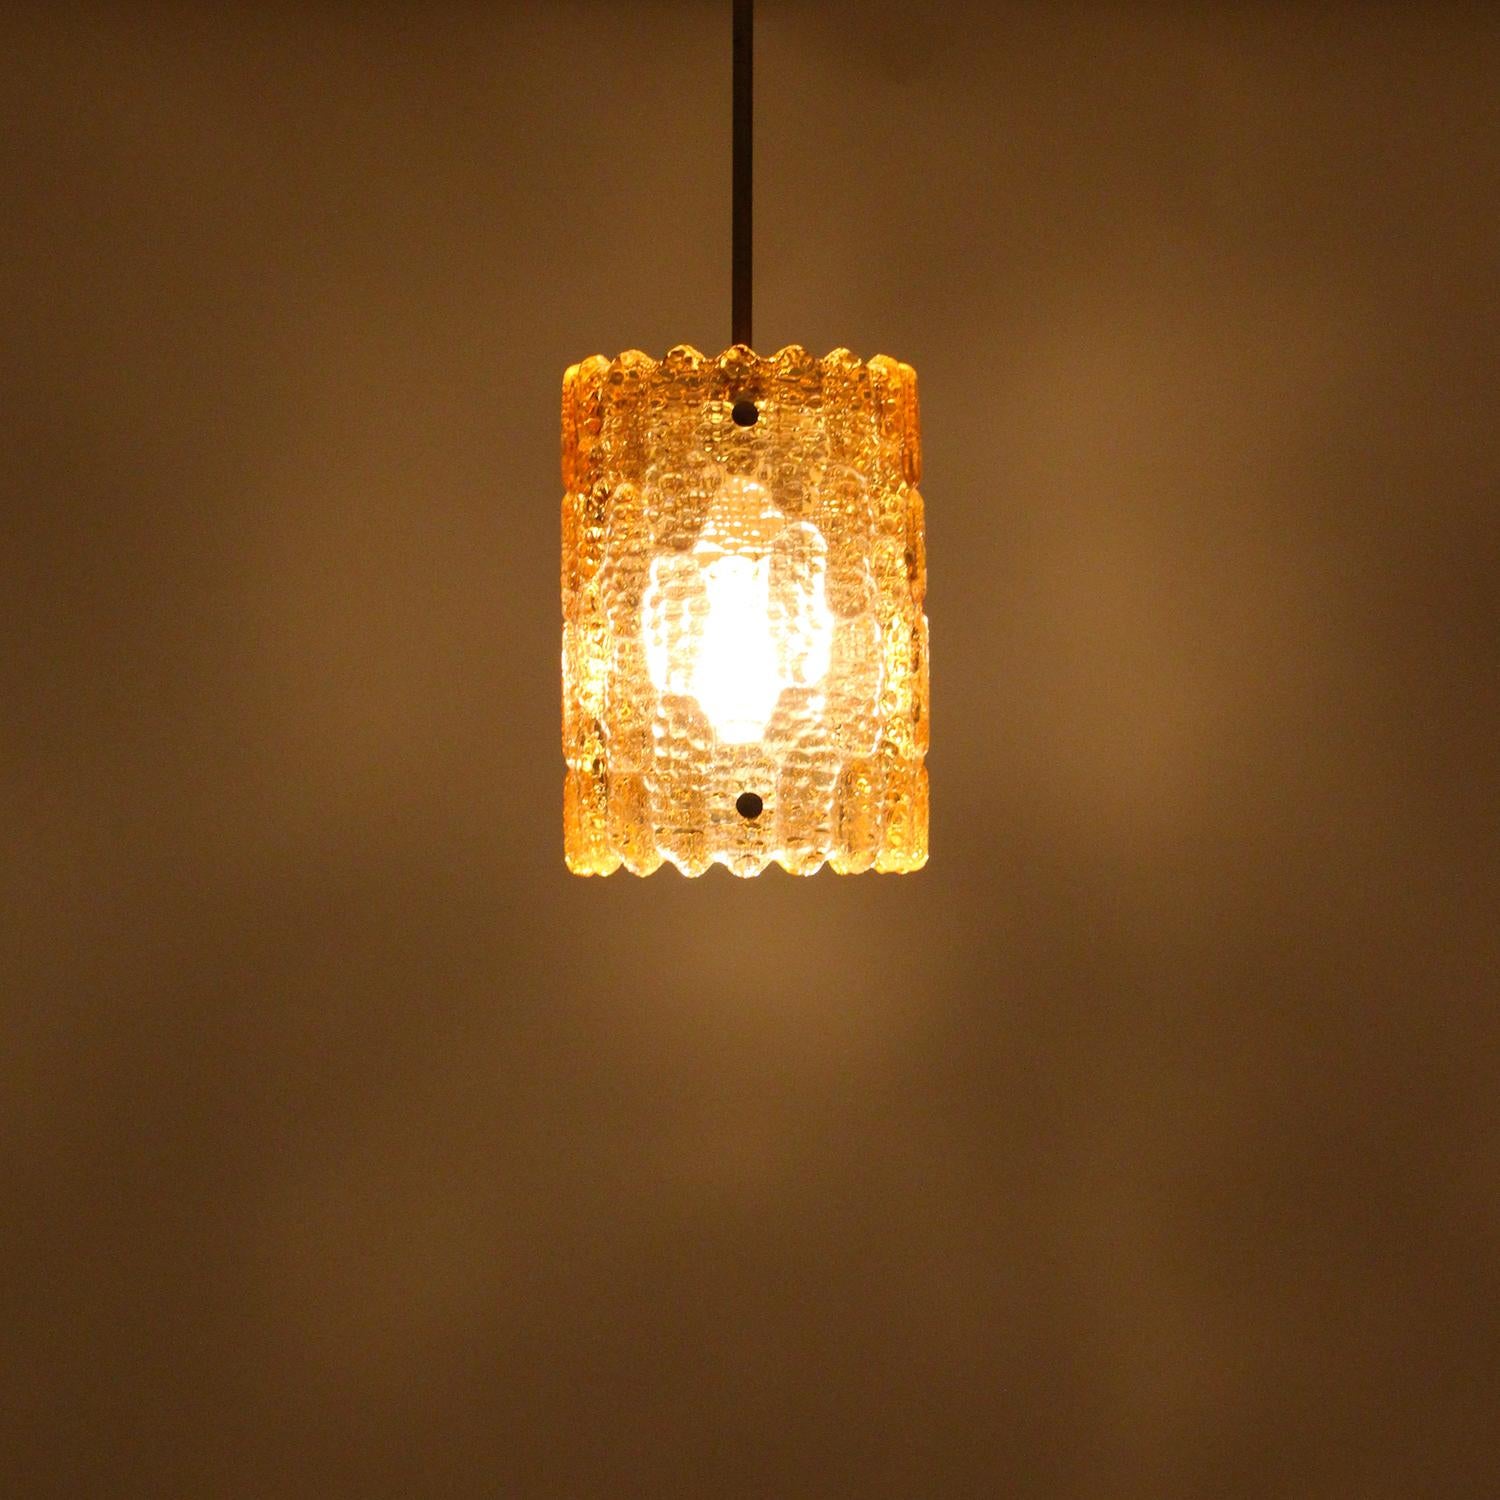 Orrefors Gefion crystal light (P 385) - Scandinavian Mid-Century Modern amber crystal pendant by Carl Fagerlund for the collaboration between Lyfa and Swedish glass-works, Orrefors in the 1960s. Gorgeous ceiling light with crystal glass and brass -